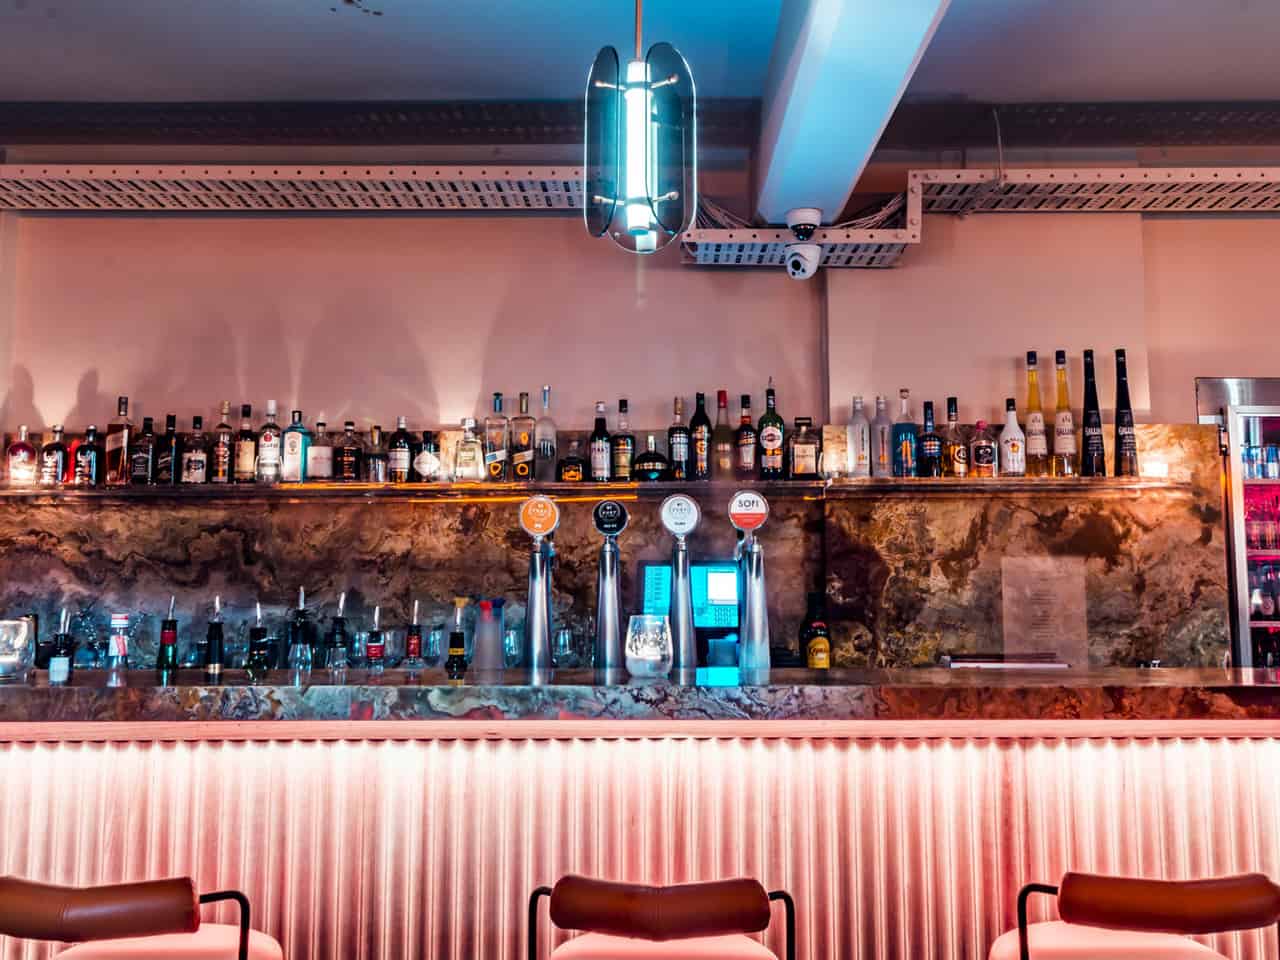 Bar area with shelves with bottles and neon lighting